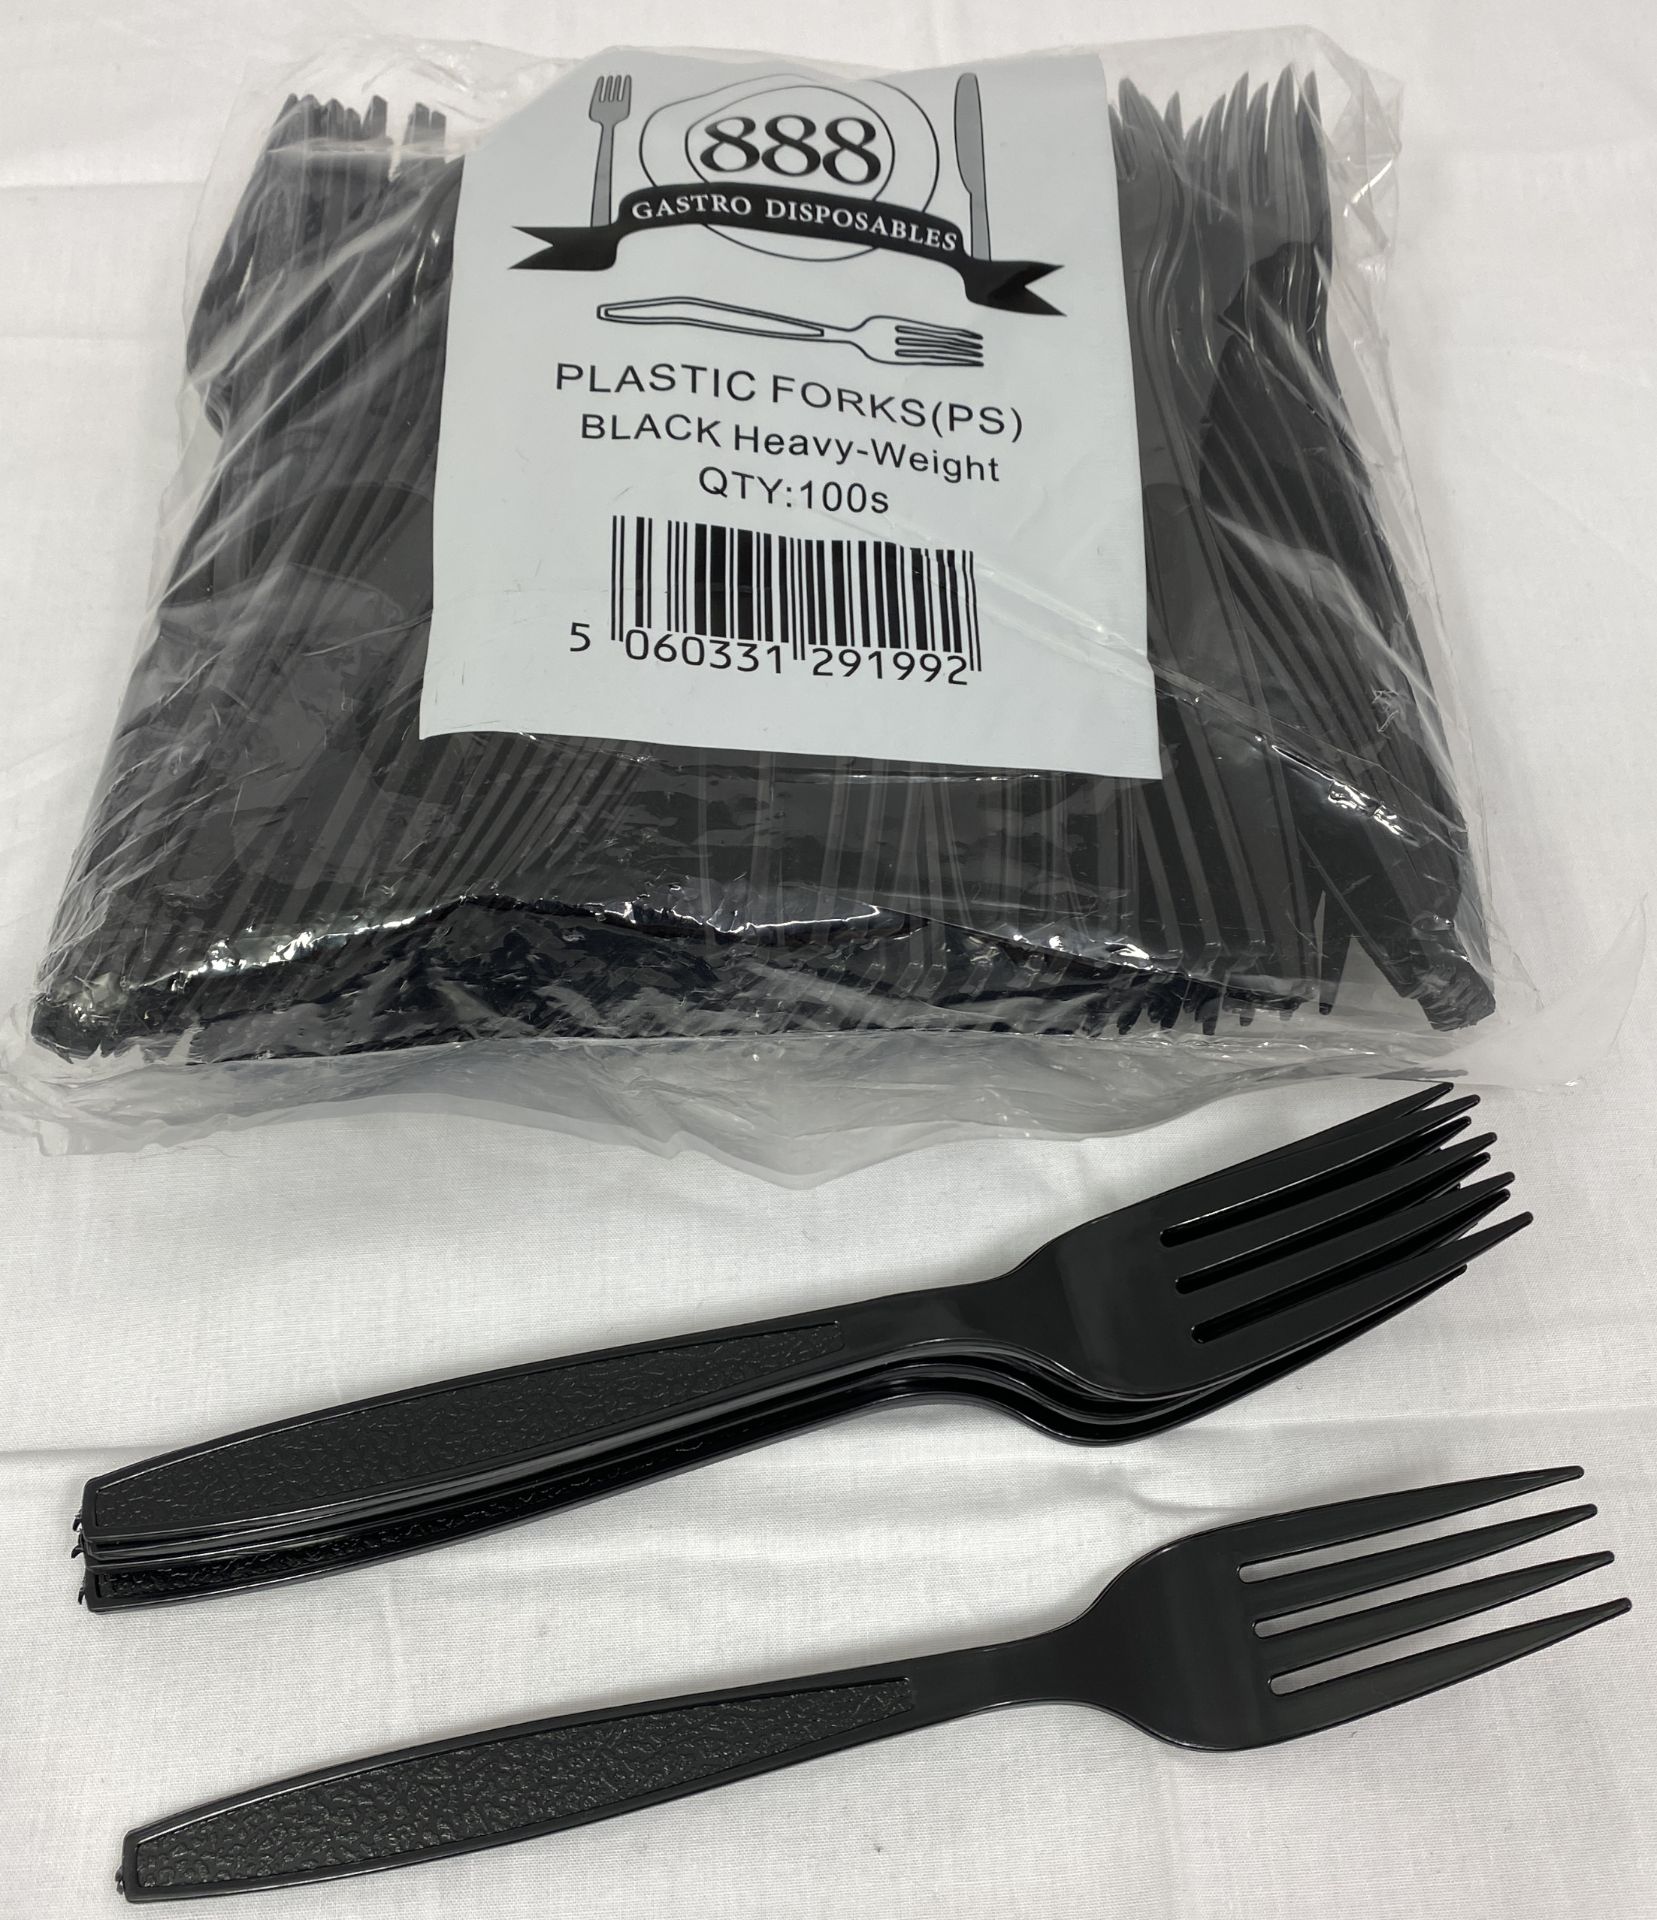 2 x Boxes of 1000 Plastic Forks by 888 Gastro Disposables | DSP7